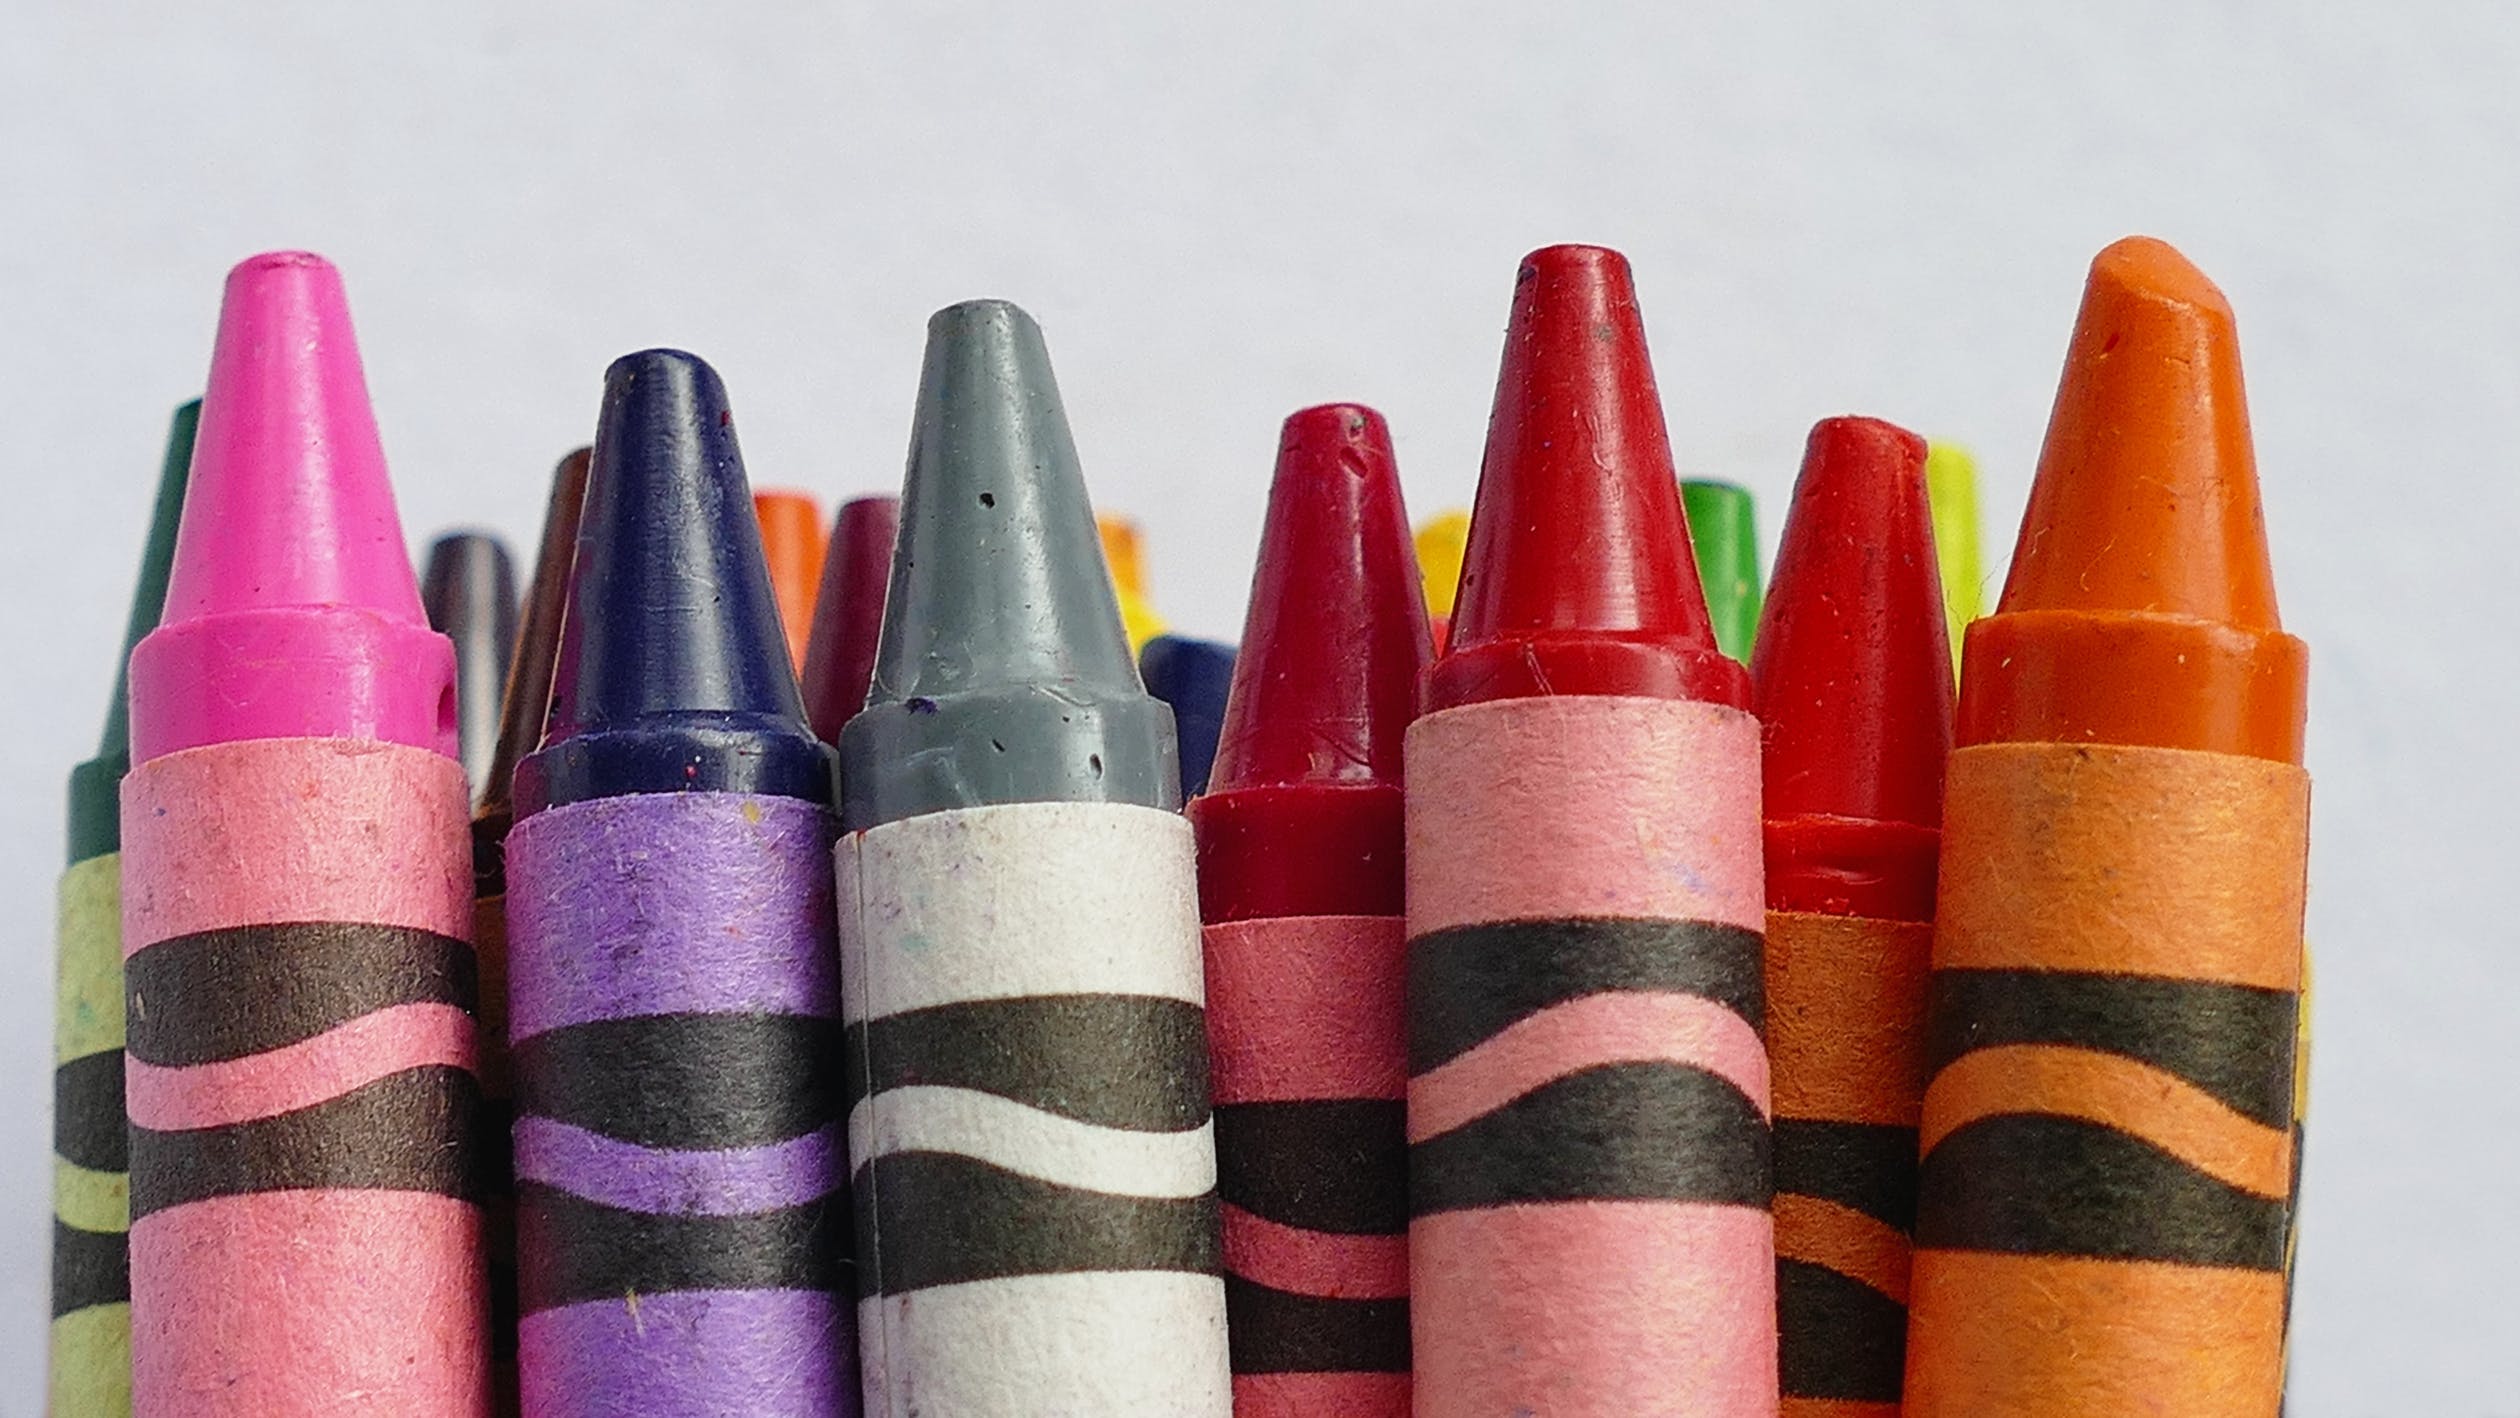 Small Business, Big Lessons™ - Time to Break Out The Big Crayons